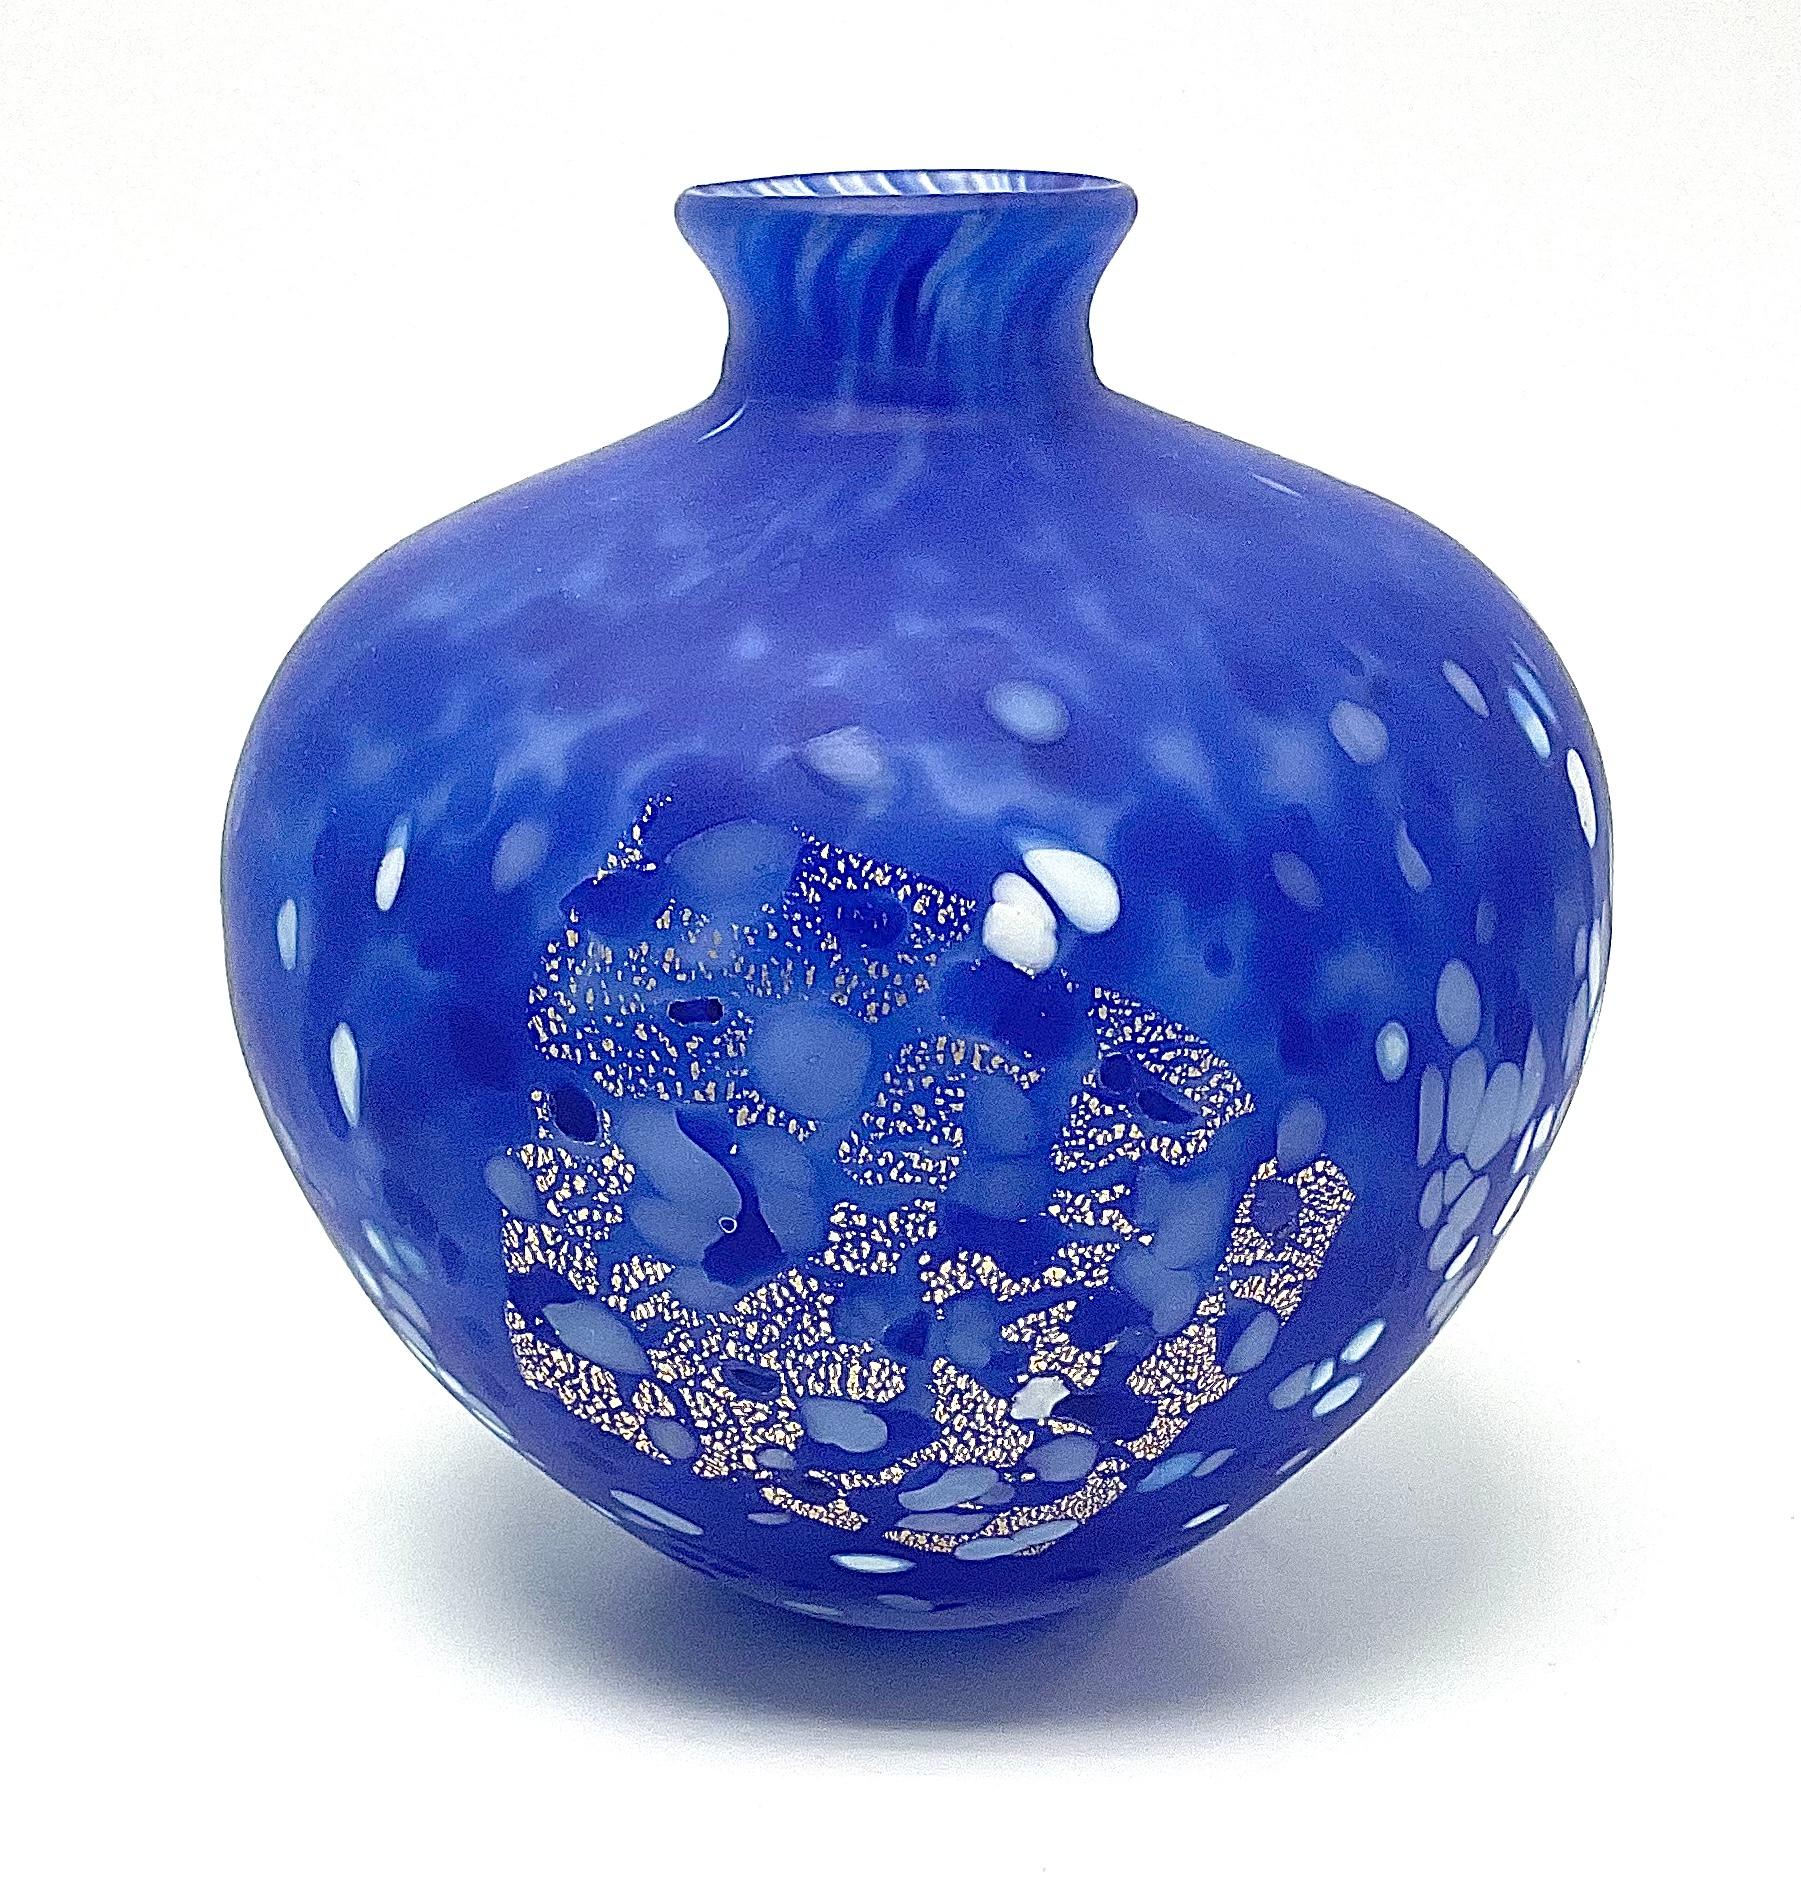 Artist Signed art glass vase by Japanese artist Kyohei Fujita. Highly sought after Artist with very few objects available on the market. 

Kyohei Fujita (?? ??, Fujita Kyohei, 1921 – September 18, 2004) was a Japanese glass artist. He received